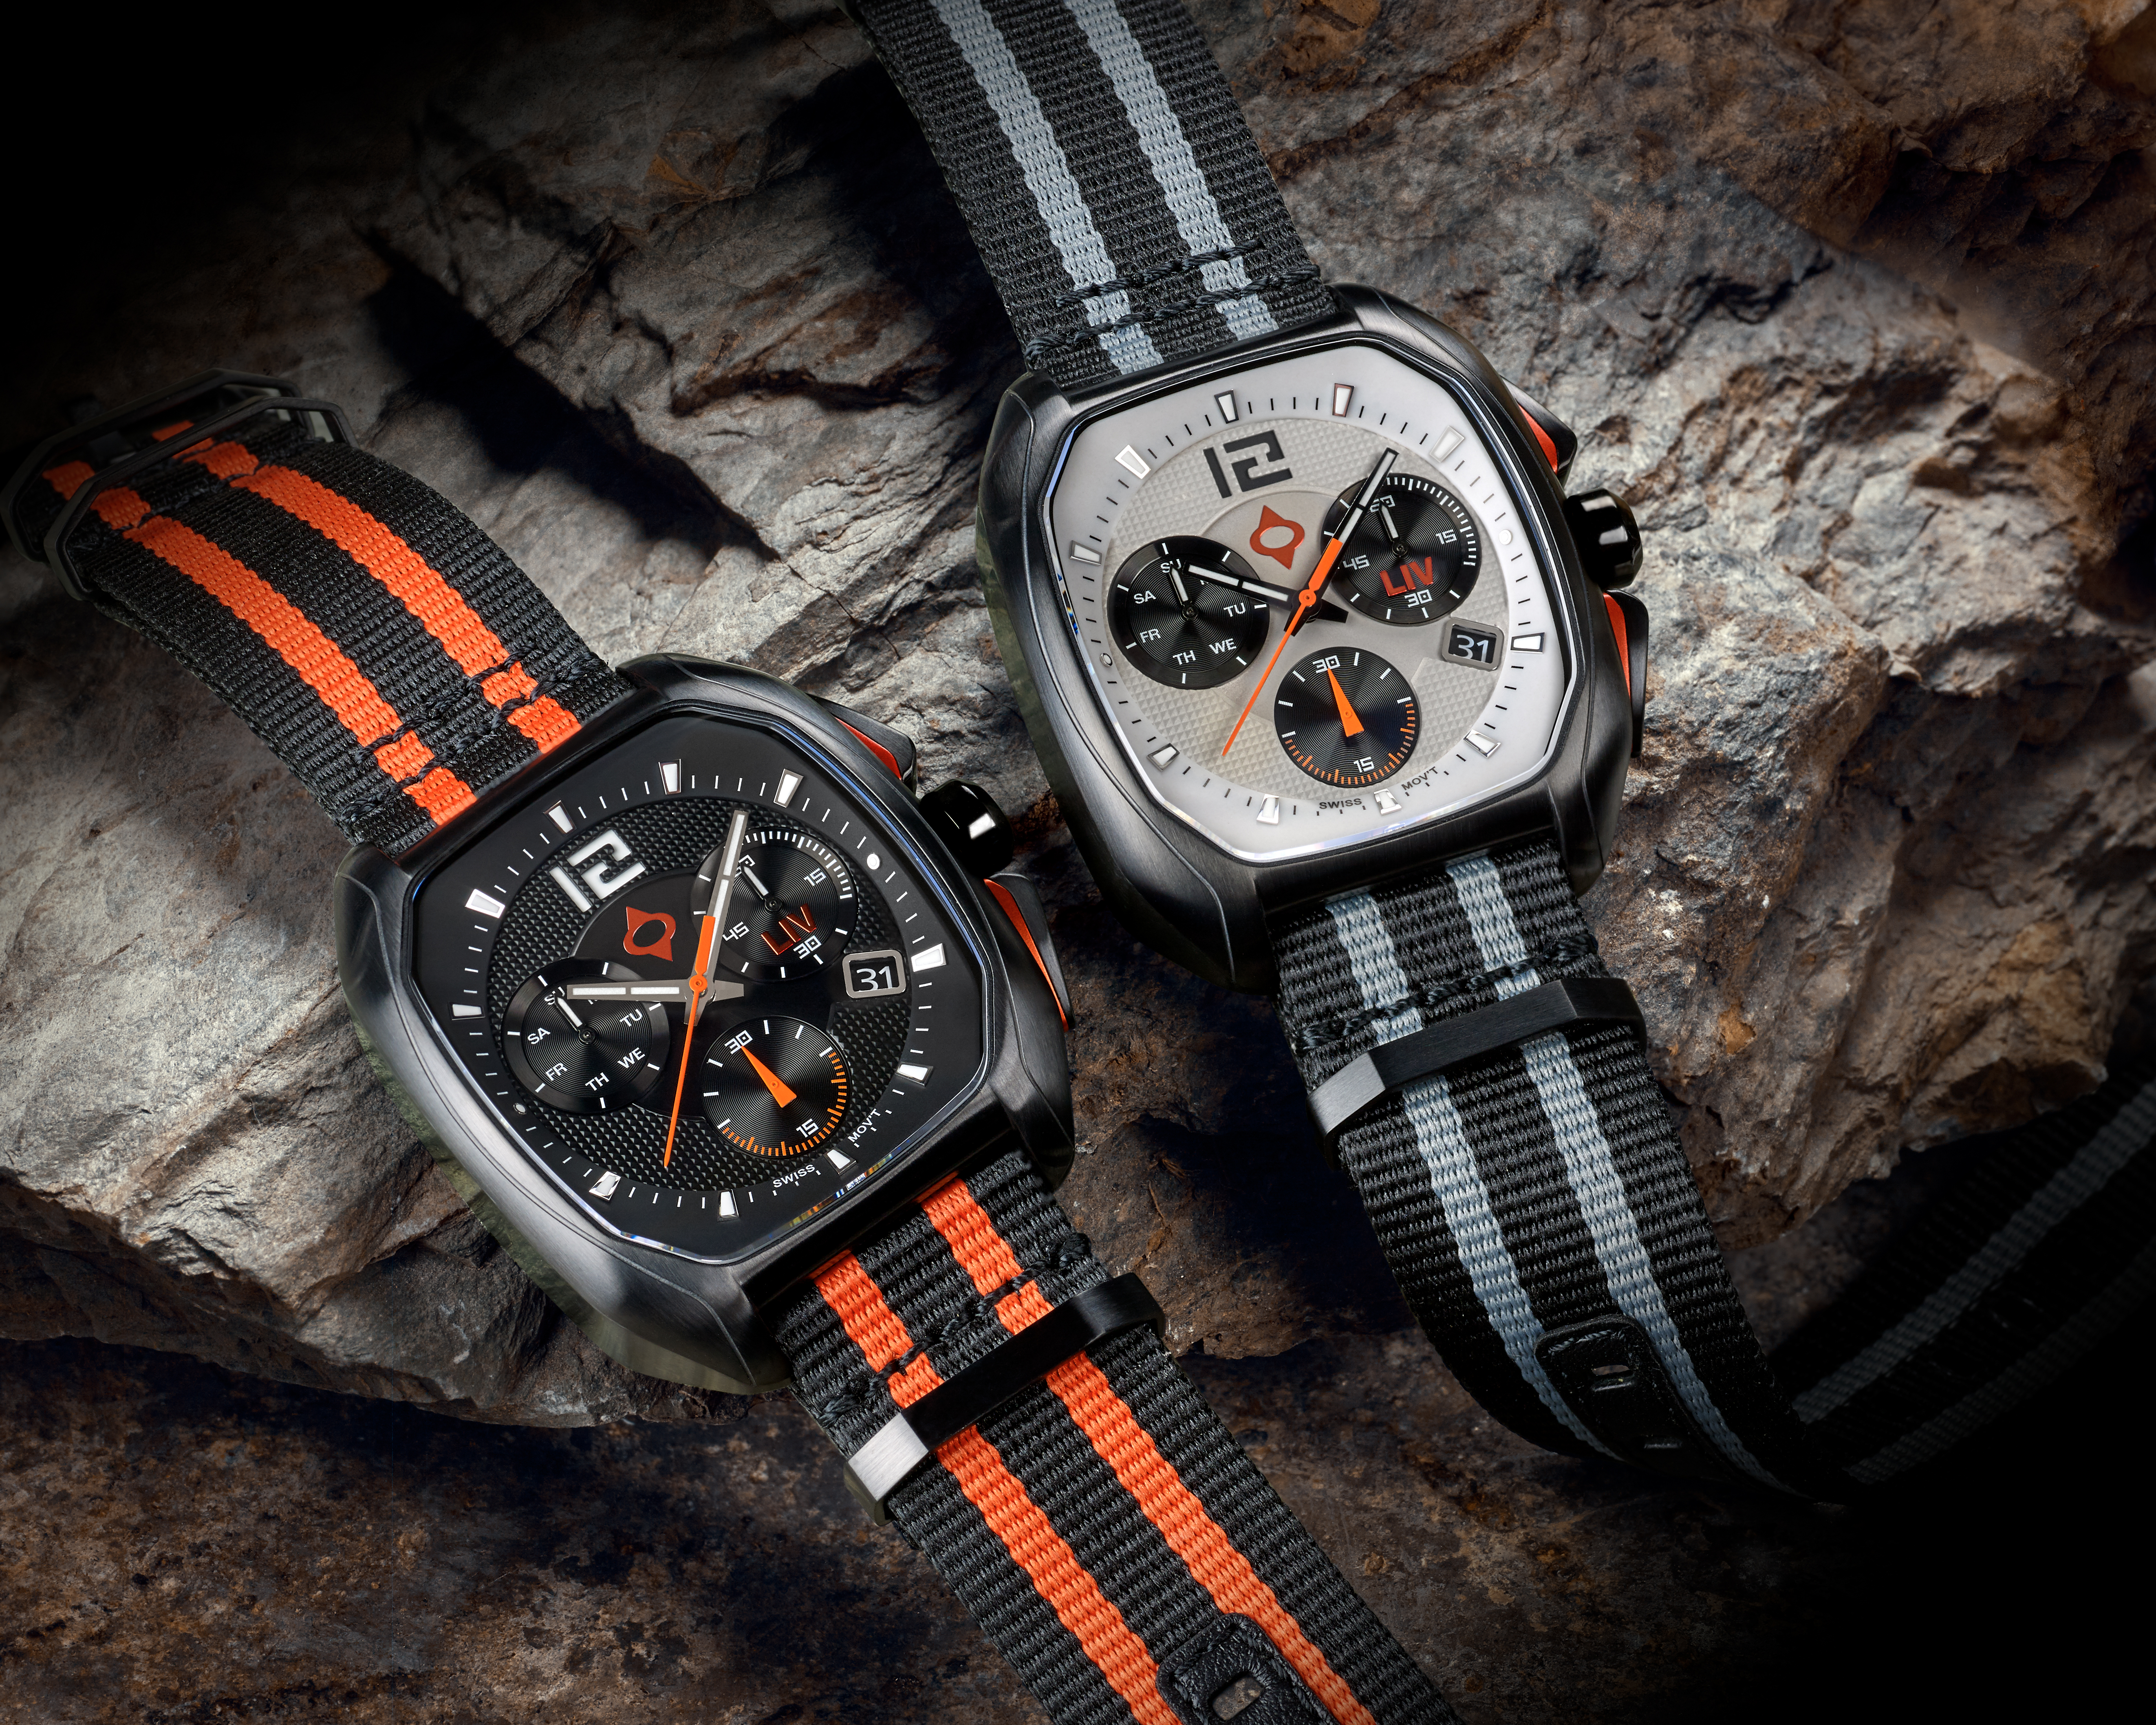 Get The New Watches & Wonders 2020 Timepieces At MR PORTER | aBlogtoWatch